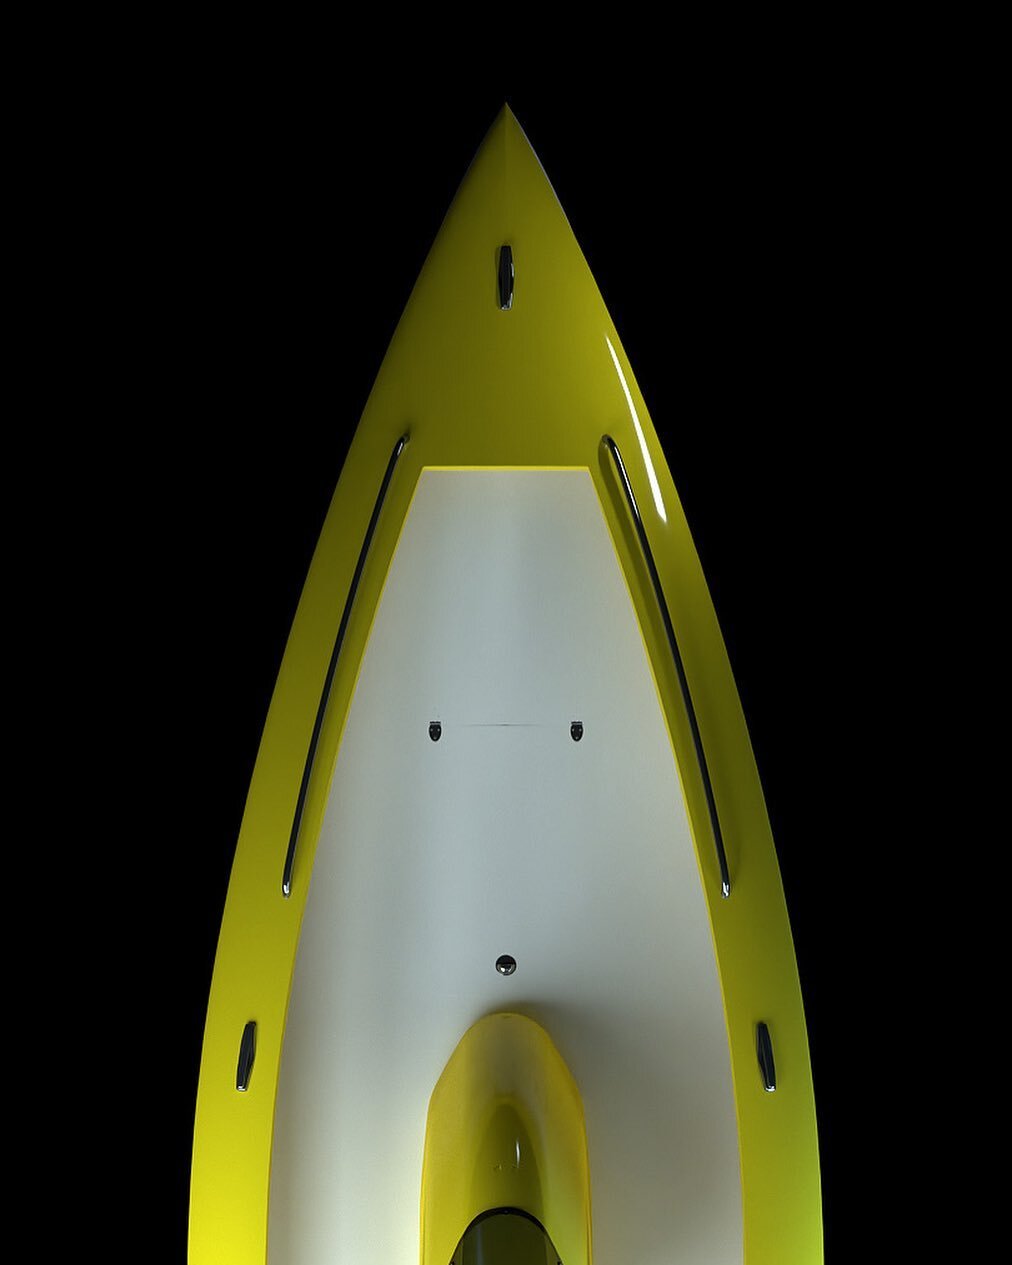 Parexo Inc. is a marine industry company redefining boating and marine logistics. With the help of a team of four Engineering PhD's as well as six top engineers, Parexo is developing future high-tech watercrafts that are both very fast as well as eco